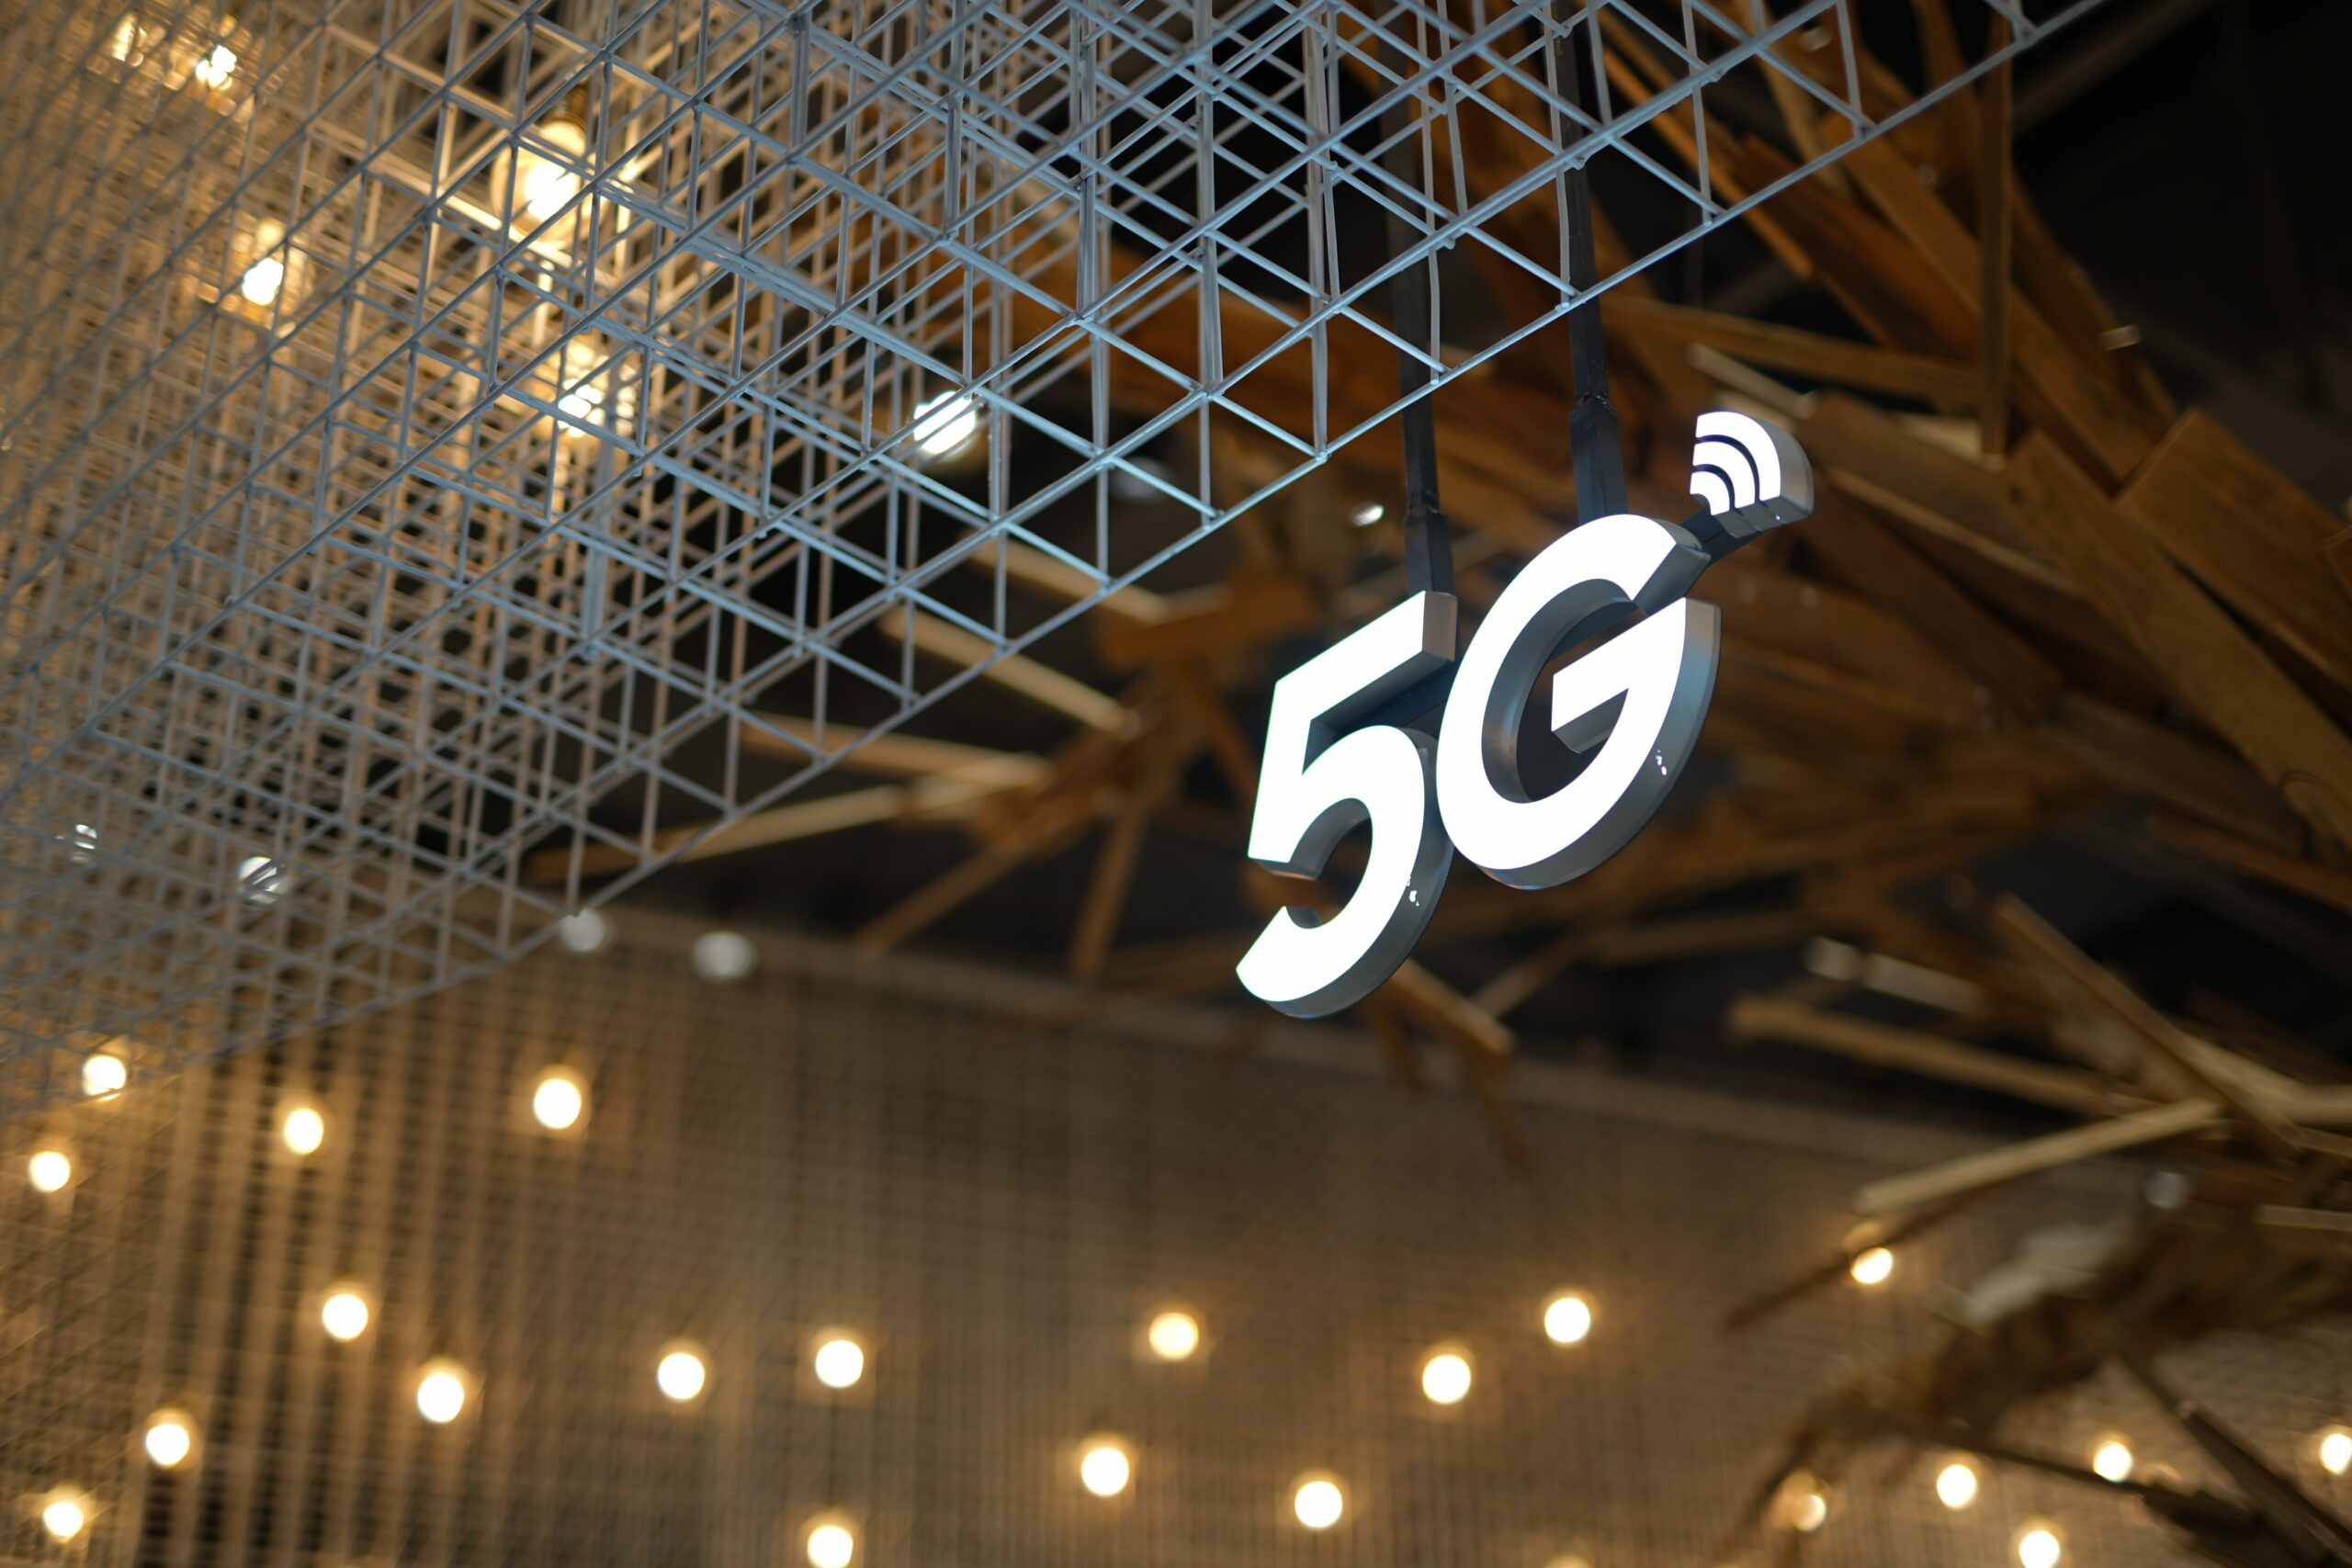 5G. Let’s see exactly why it’s awesome!